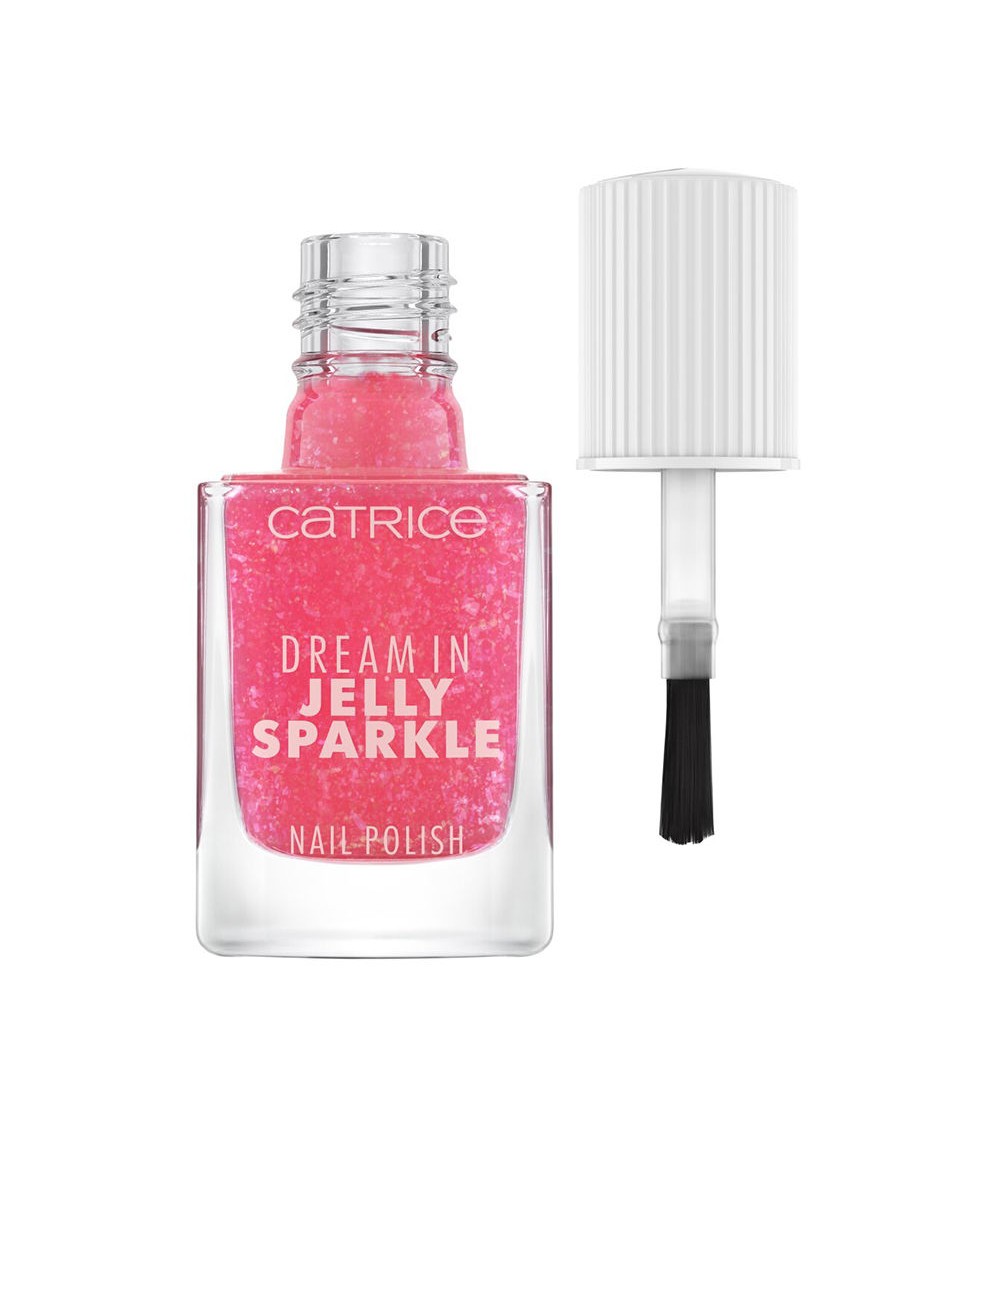 DREAM IN JELLY SPARKLE vernis à ongles 10,5ml